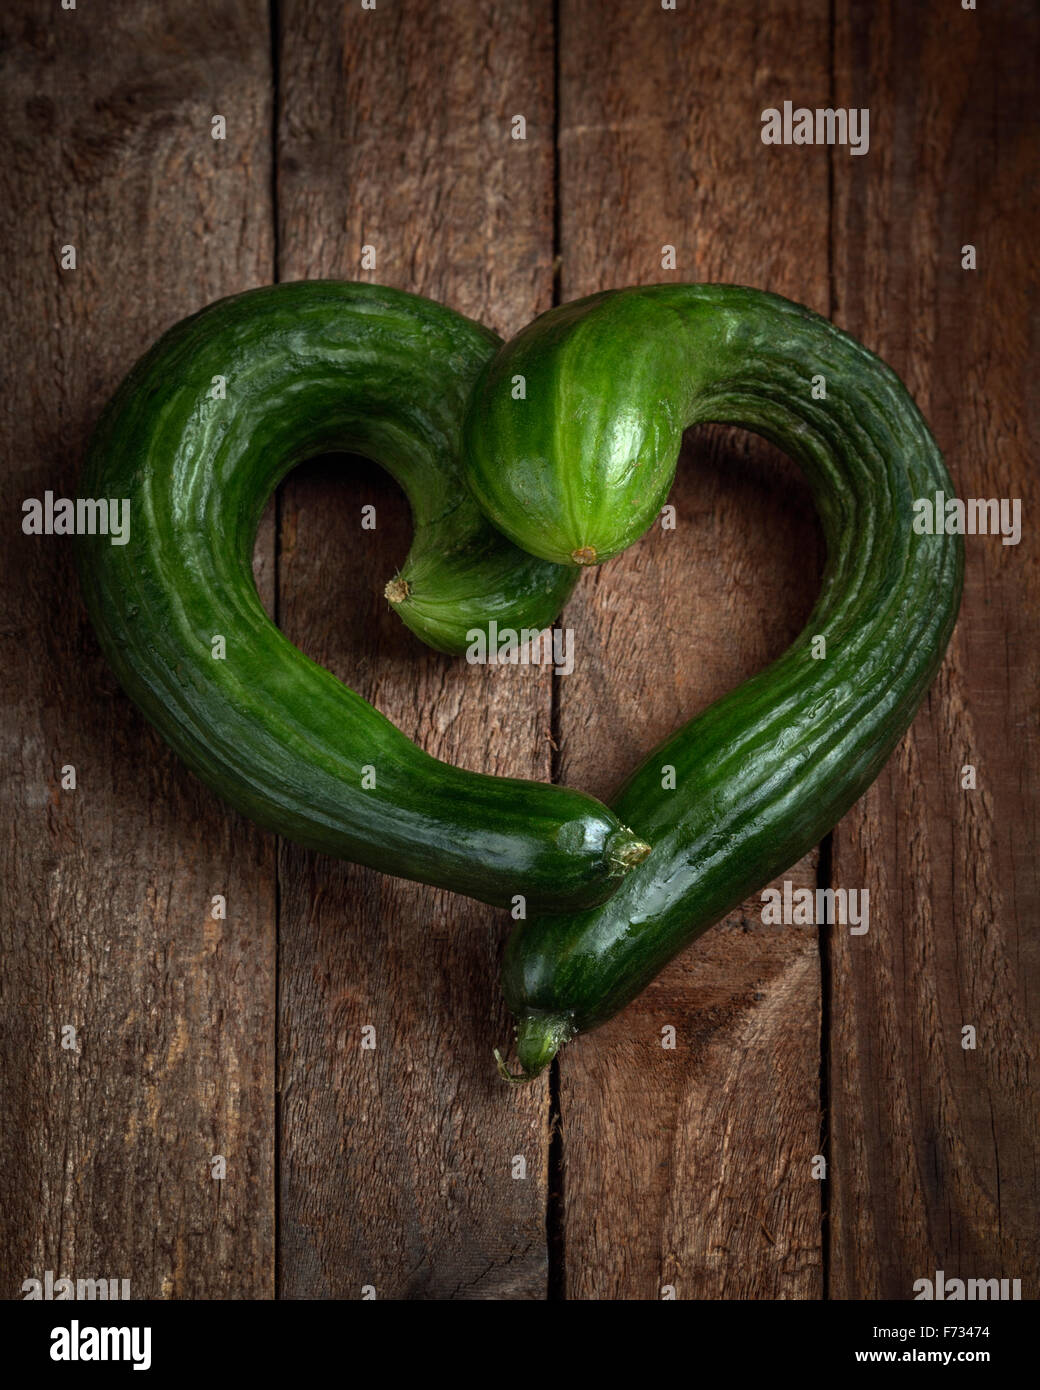 Courgettes arranged in a shape of a heart Stock Photo